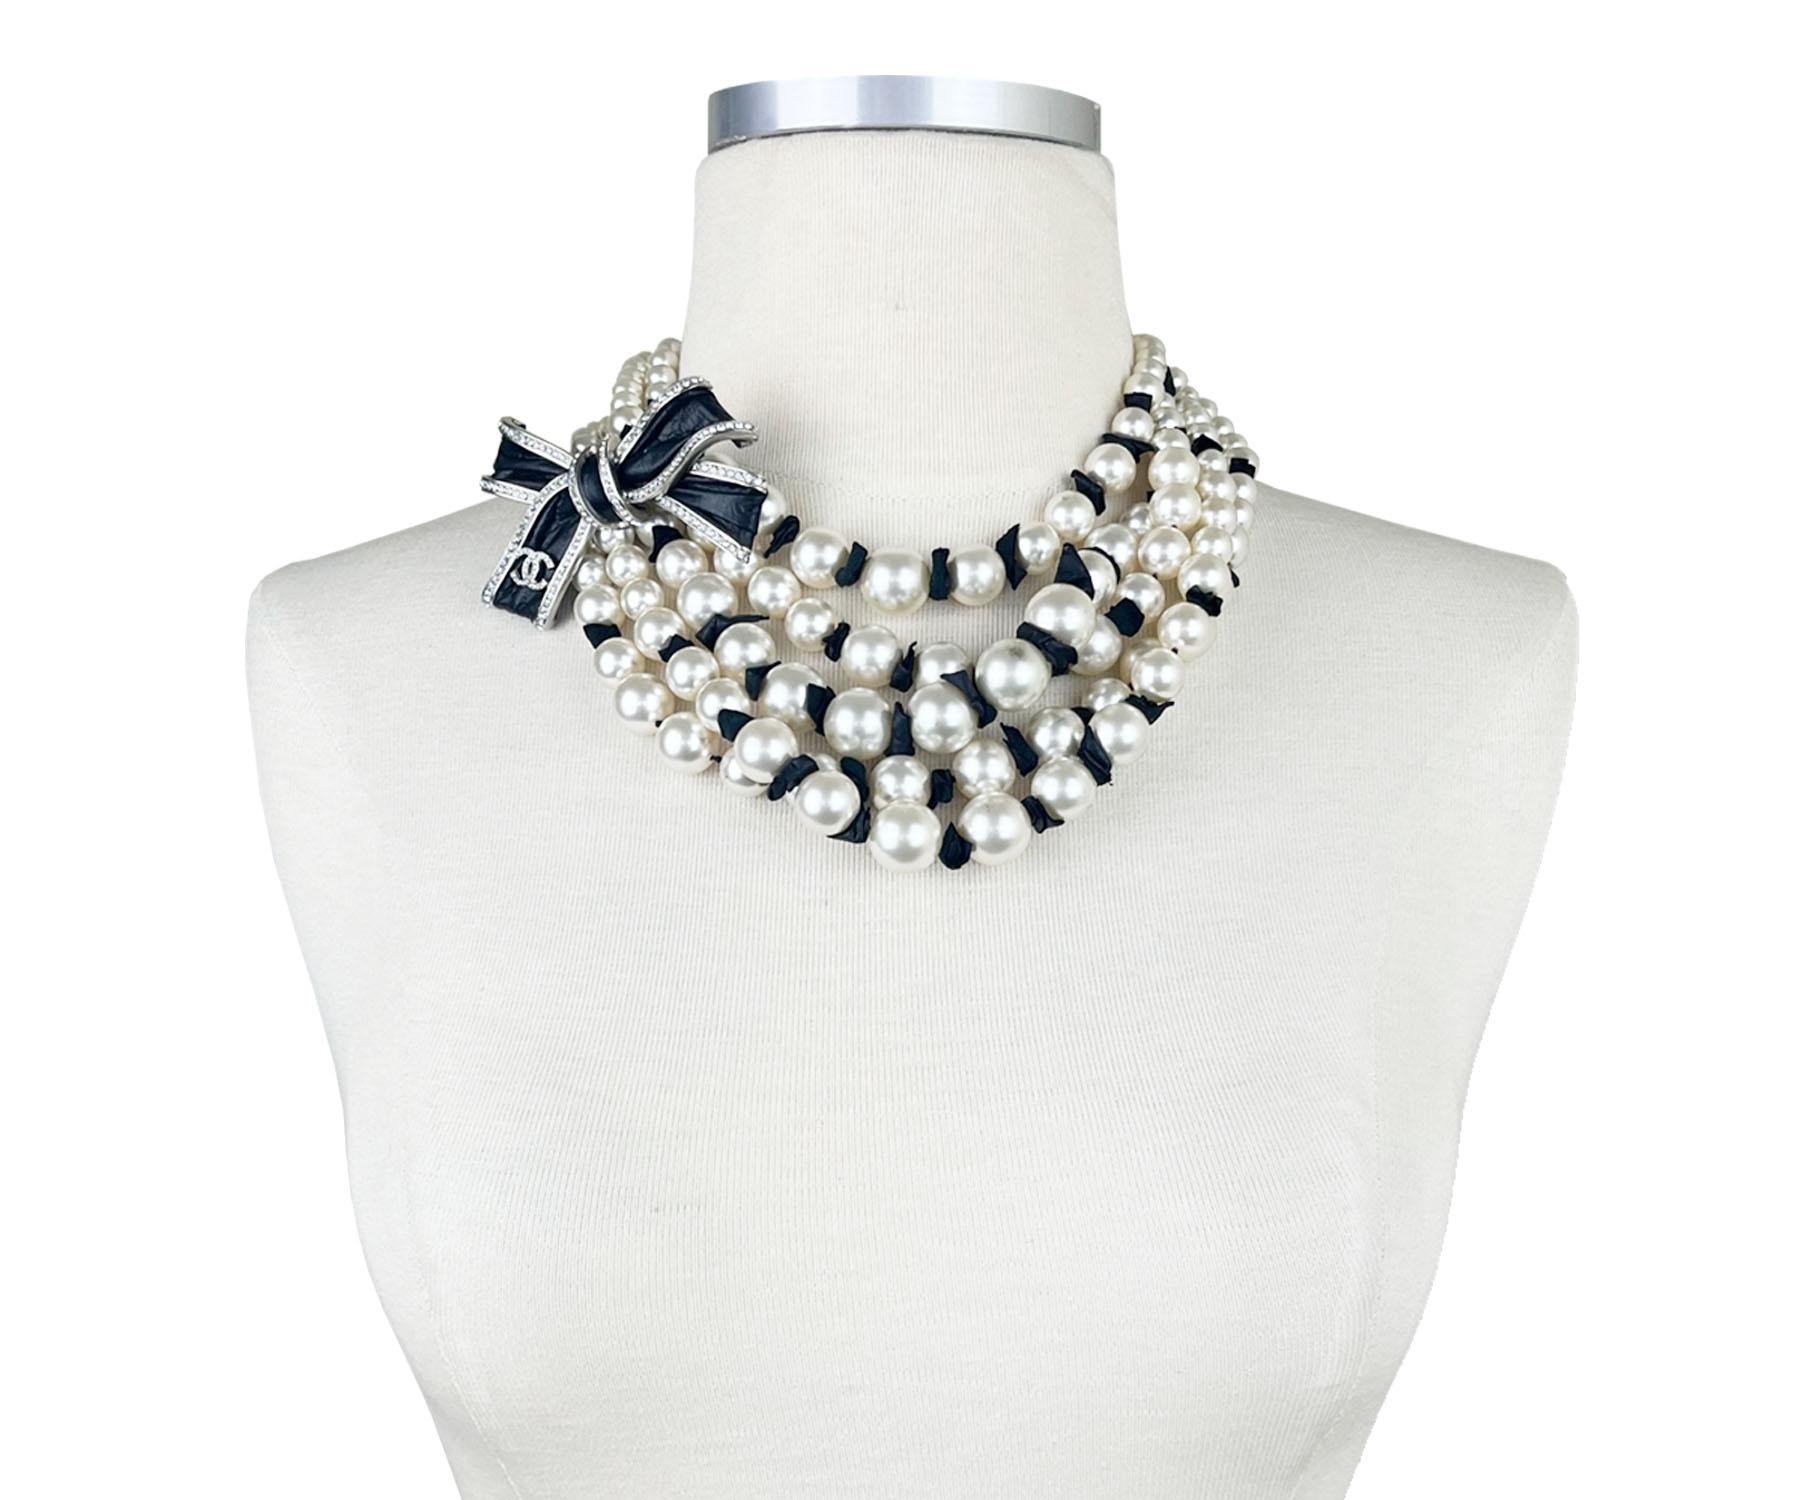 Chanel Silver CC Black Ribbon Leather 5 Strand Pearl Short Necklace In Good Condition For Sale In Pasadena, CA